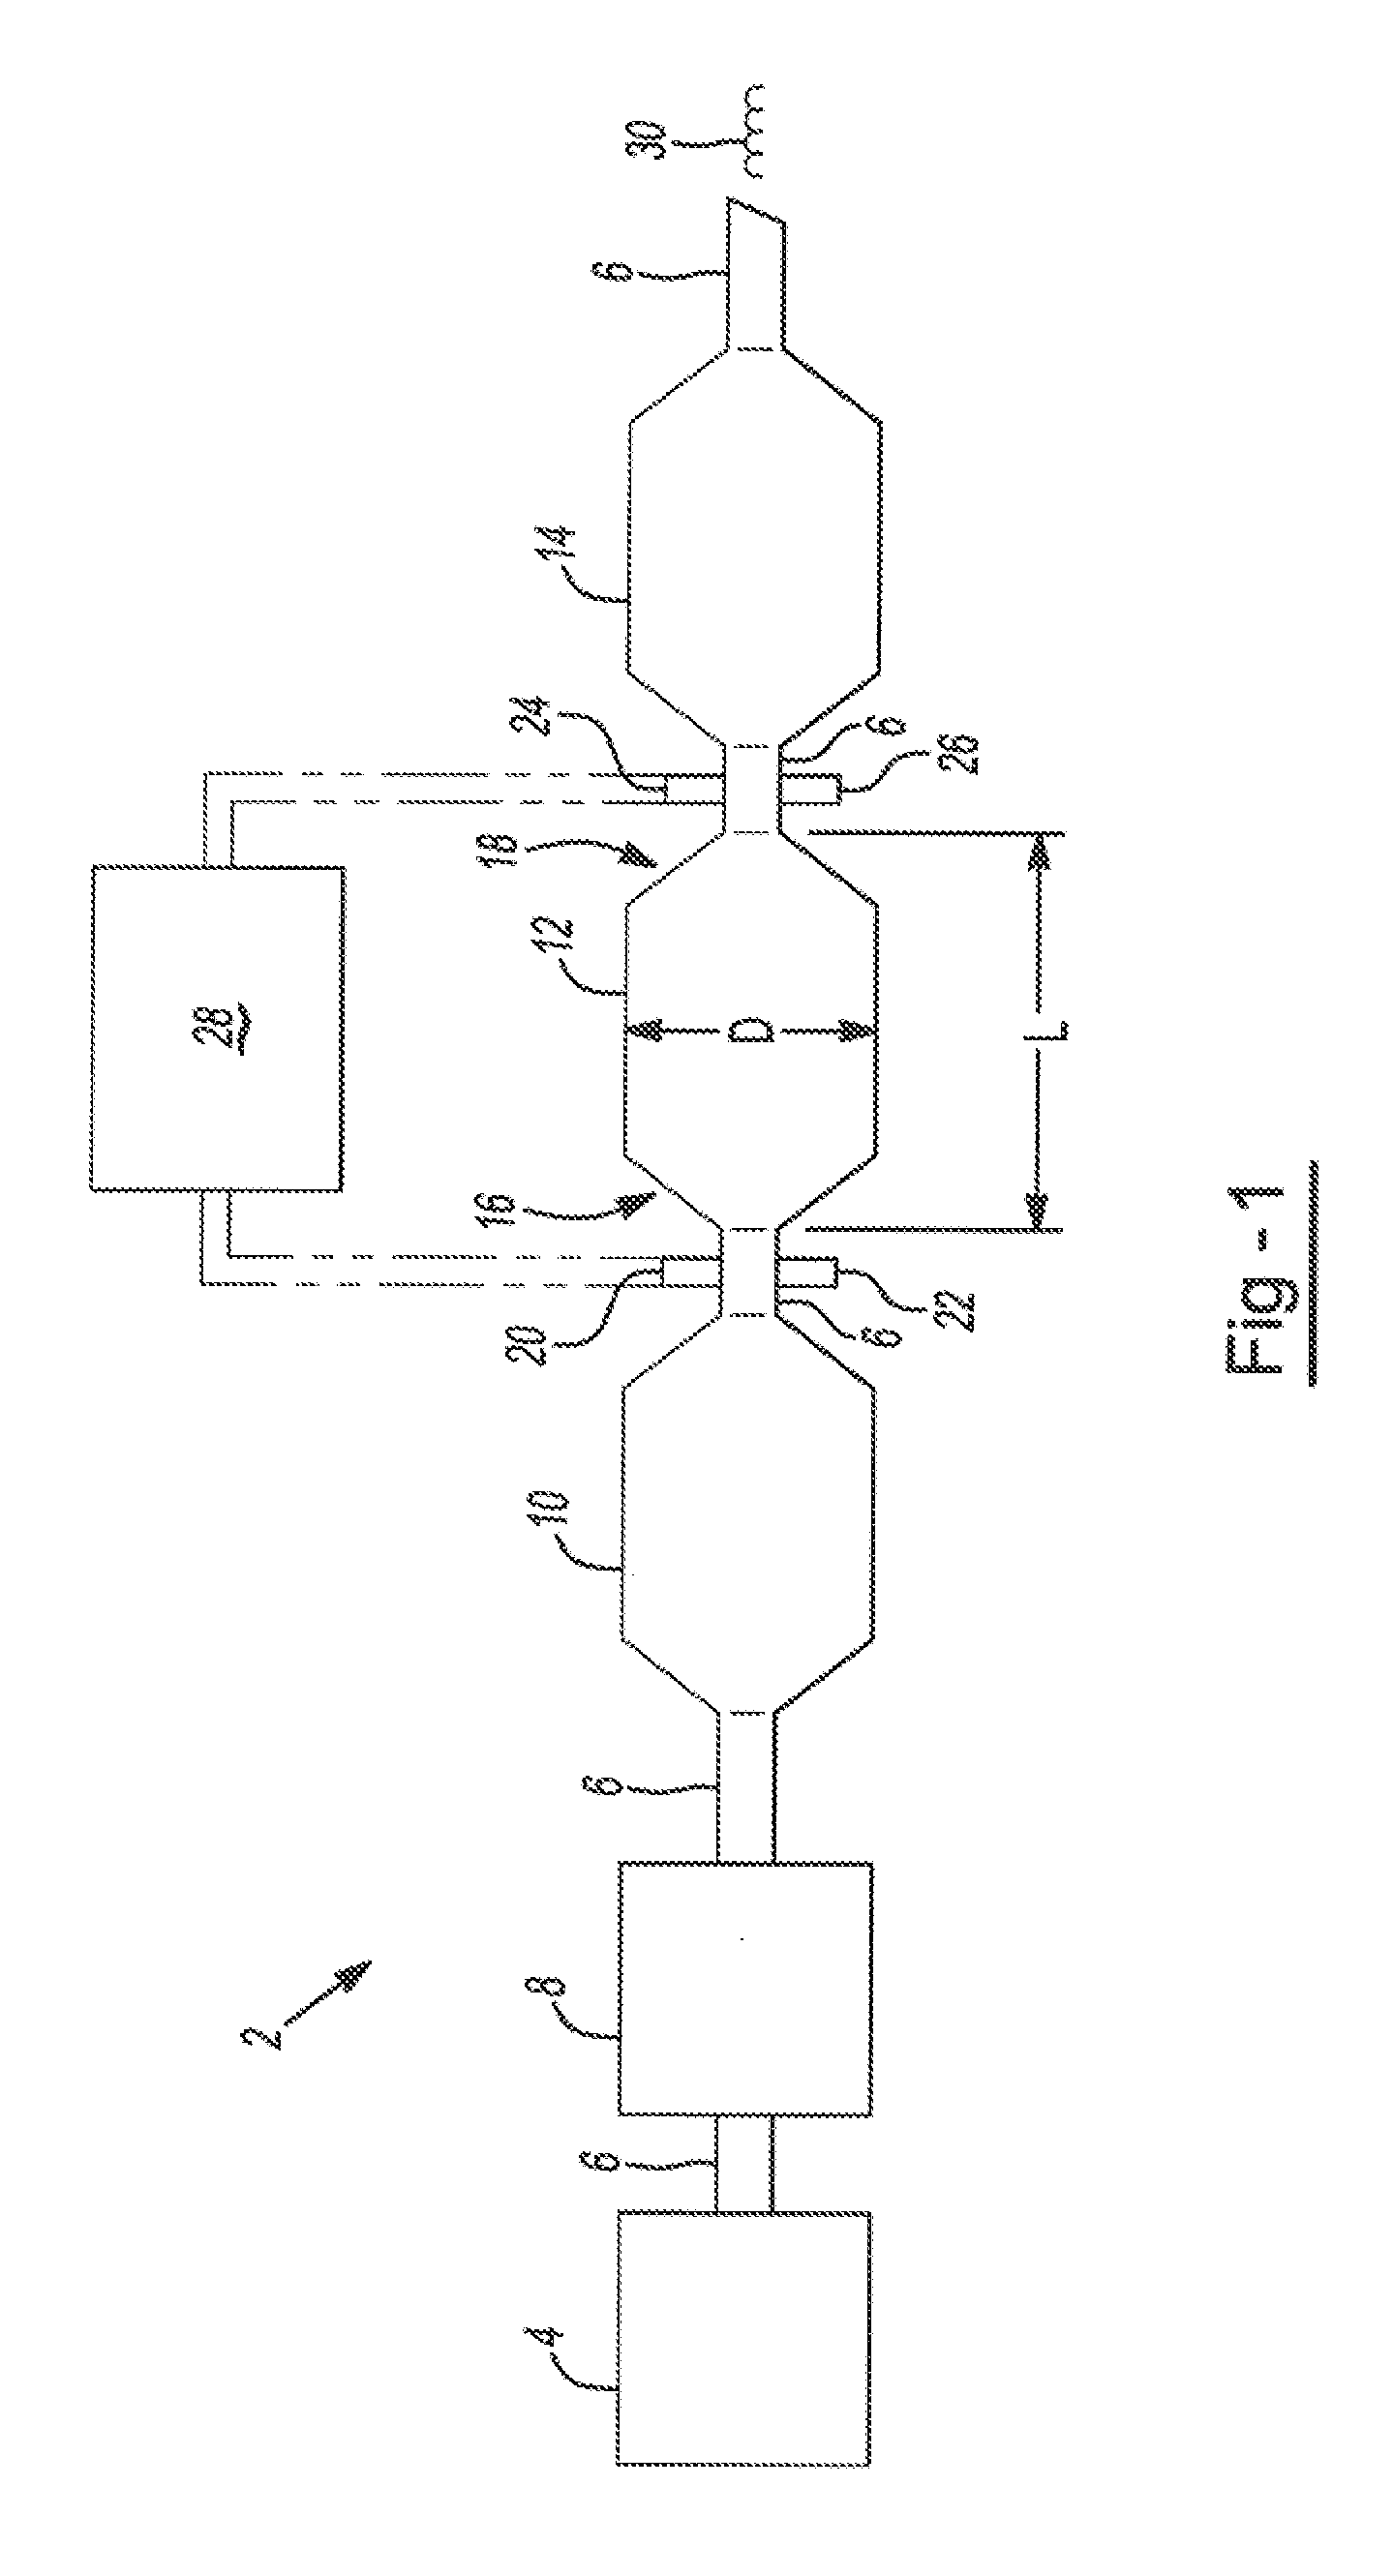 Method and apparatus for decreasing fuel comsumption during particulate filter generation